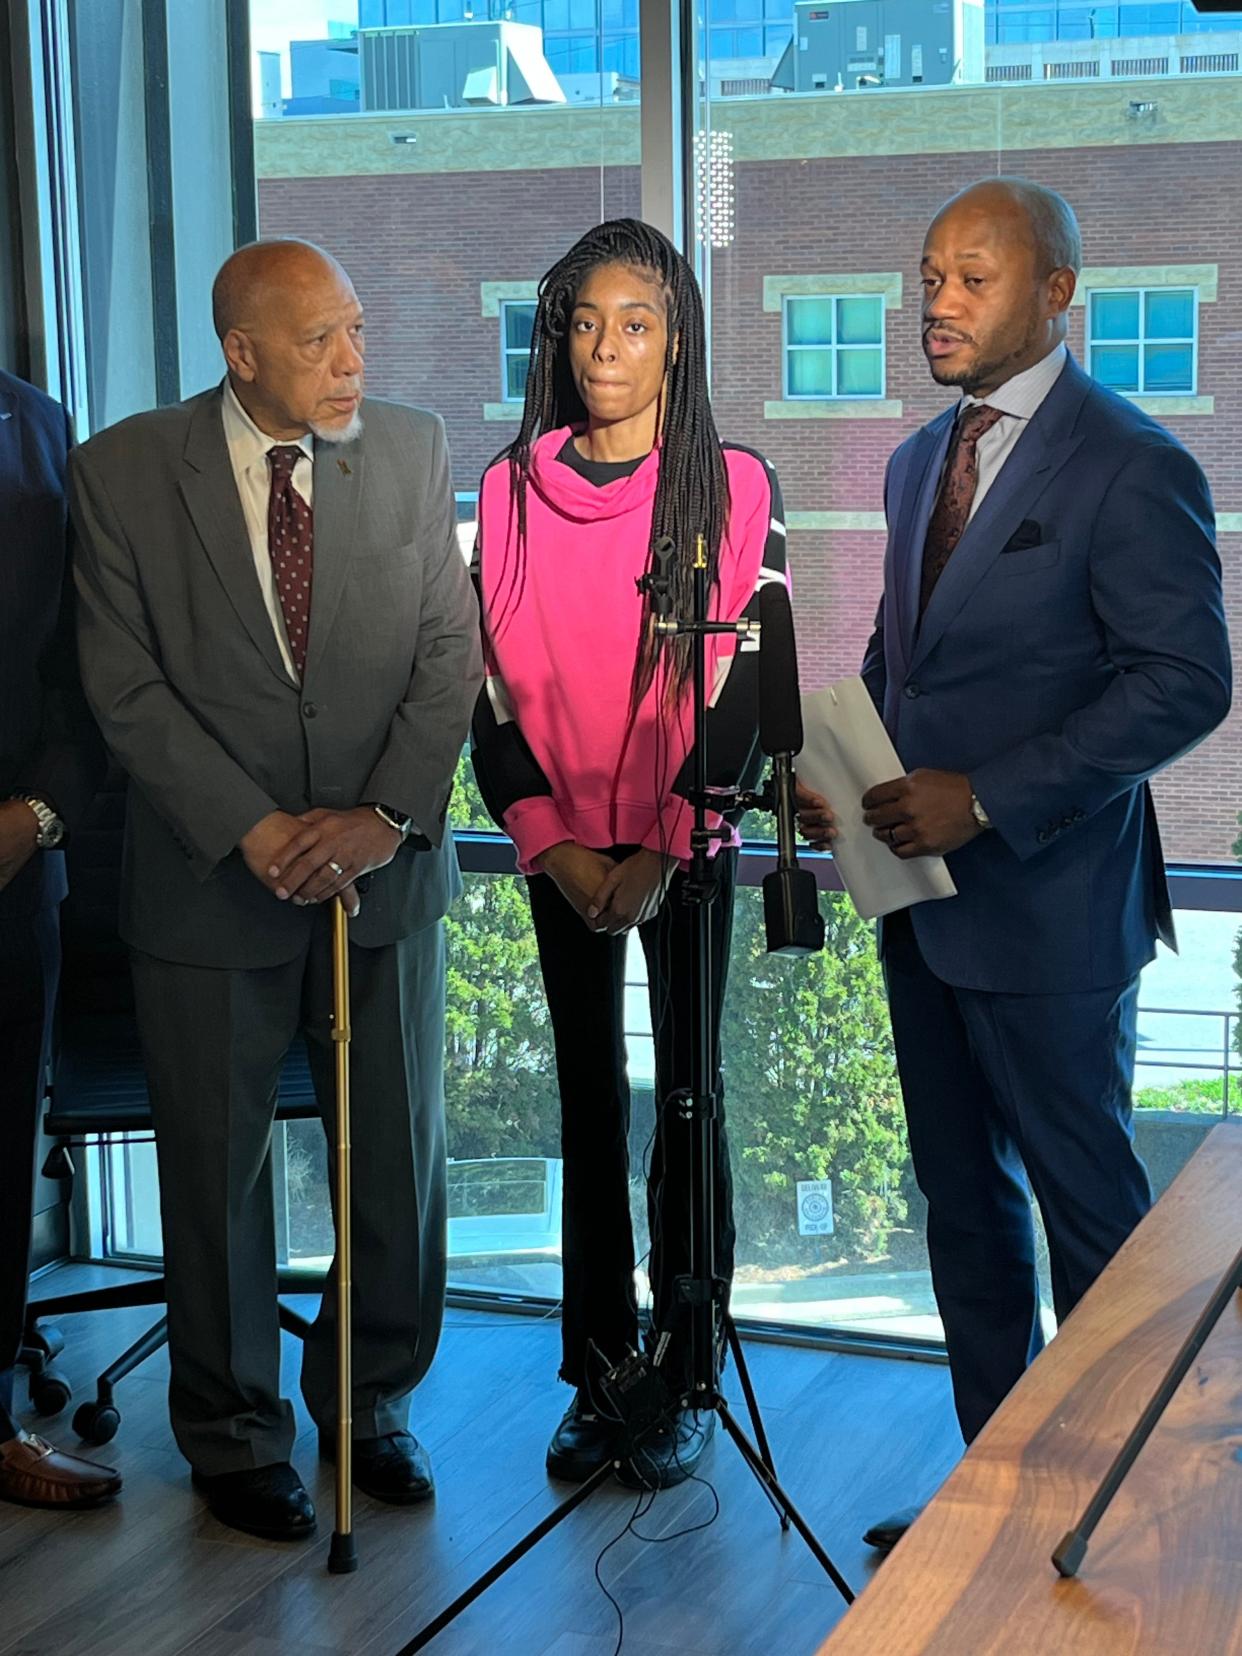 Travonsha Ferguson is joined by her lawyers L. Chris Stewart and William Jordan. She is suing Walgreens after she was shot by a store clerk while seven months pregnant.